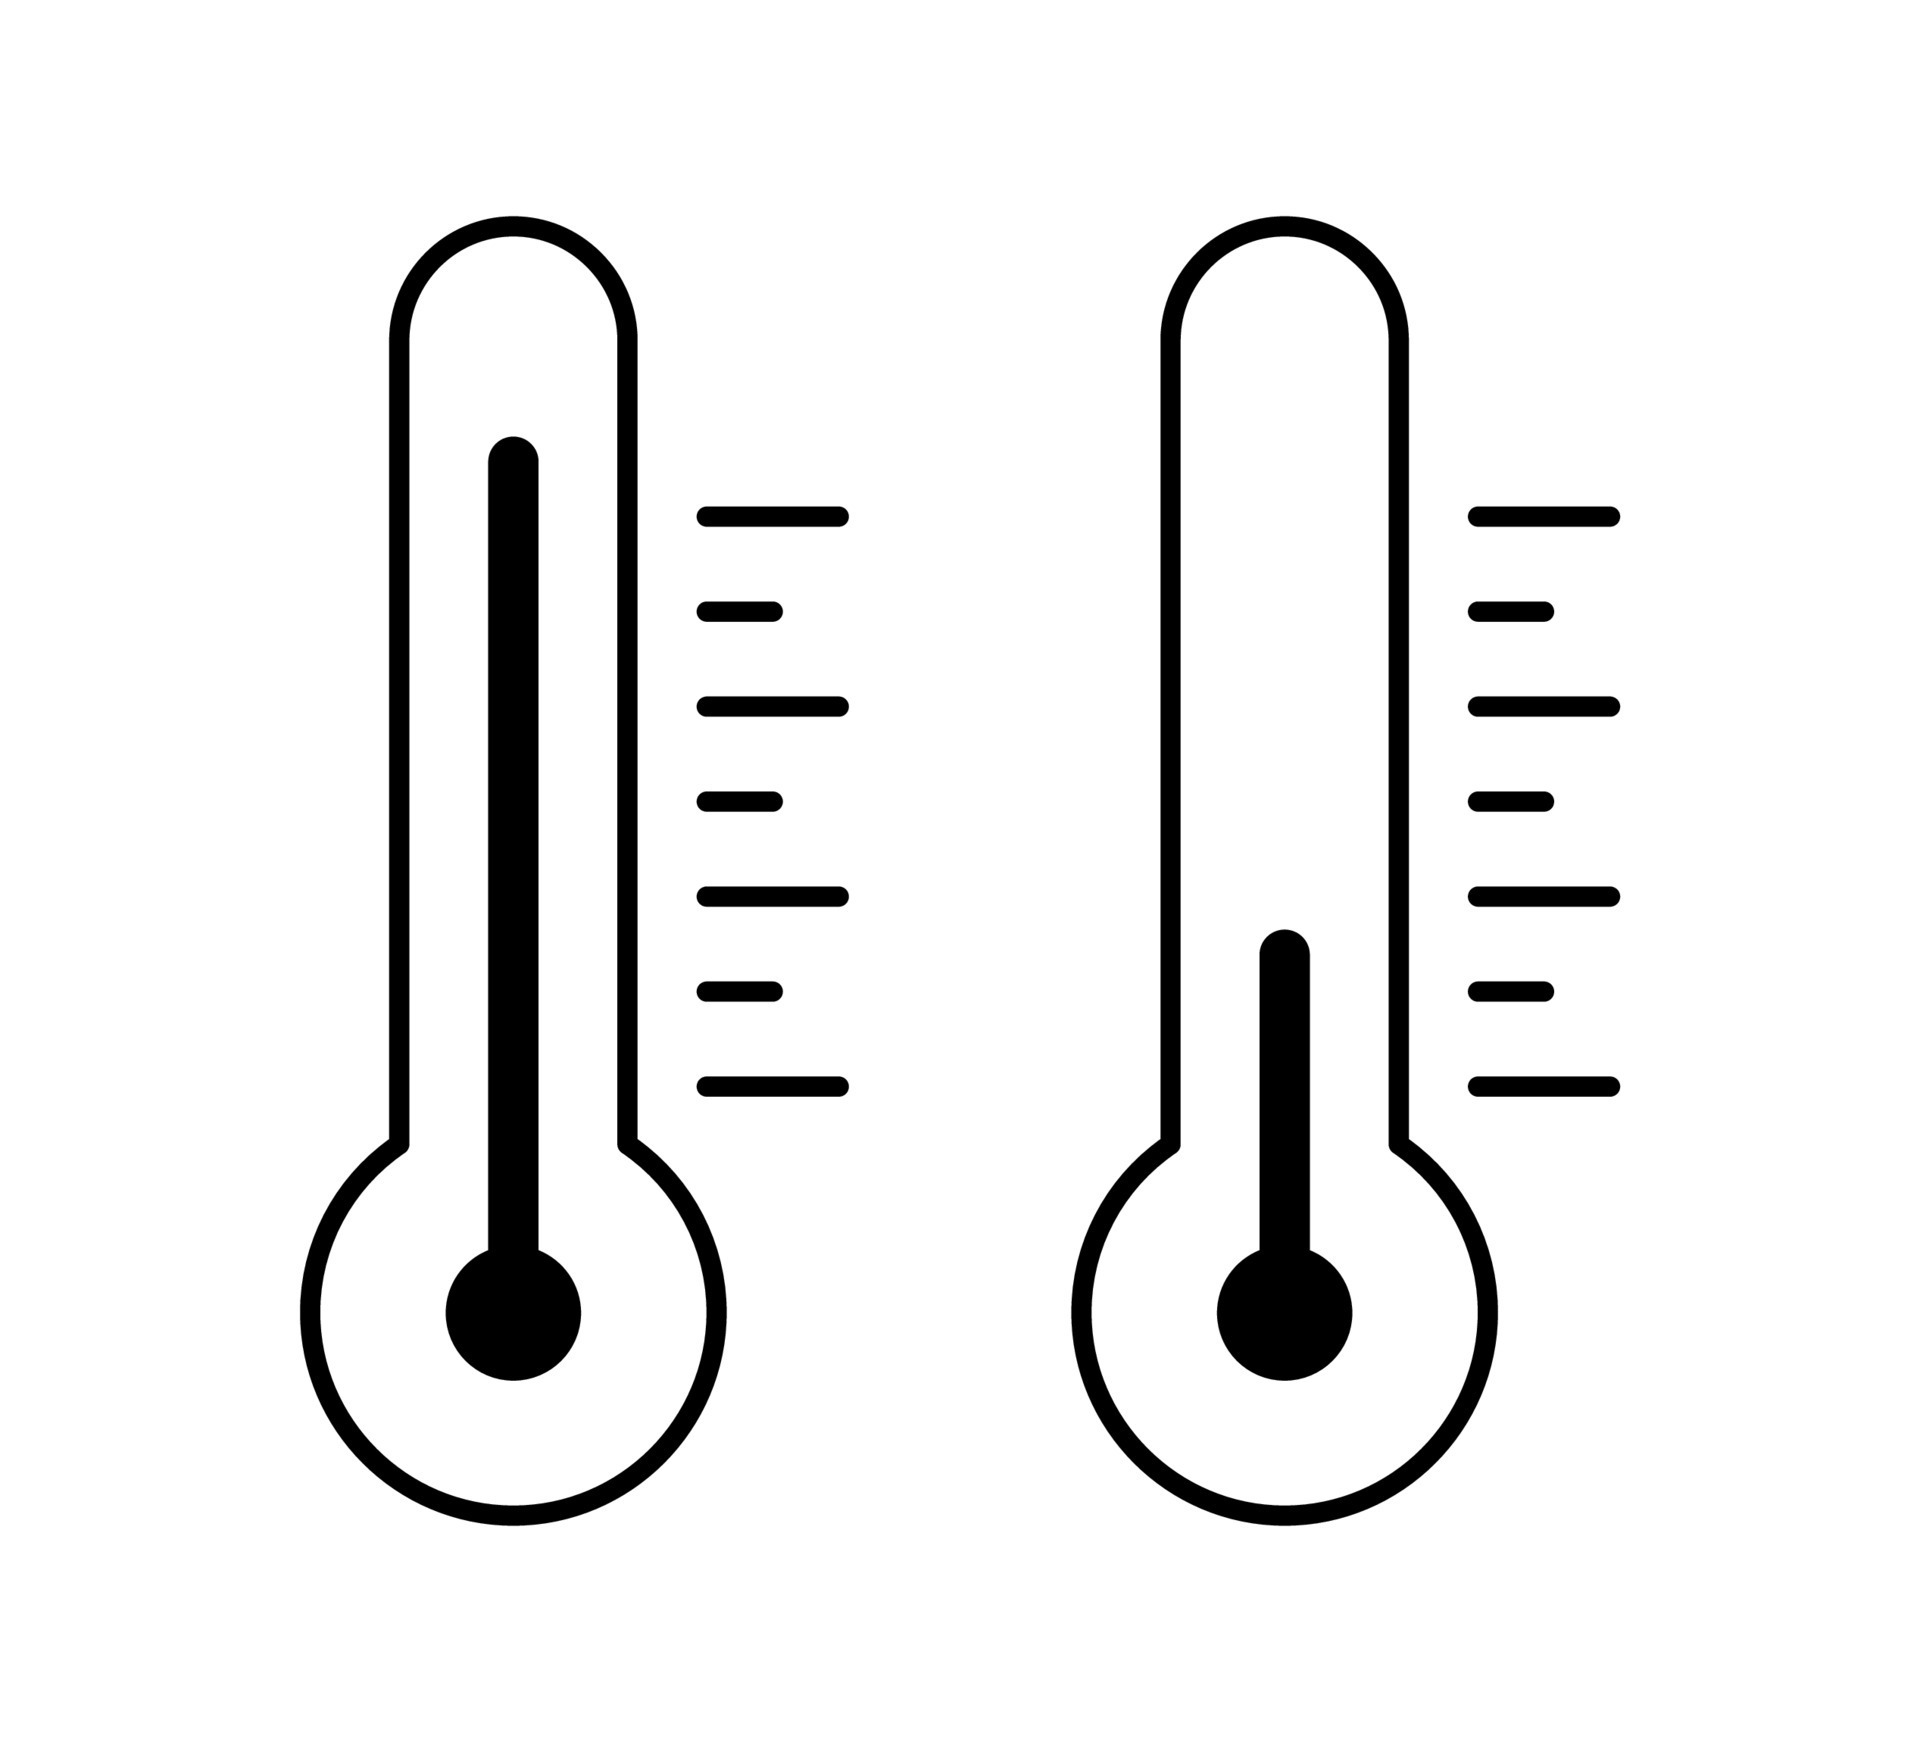 https://static.vecteezy.com/system/resources/previews/021/858/182/original/weather-temperature-thermometer-black-icon-thermometer-with-cold-and-hot-symbol-vector.jpg